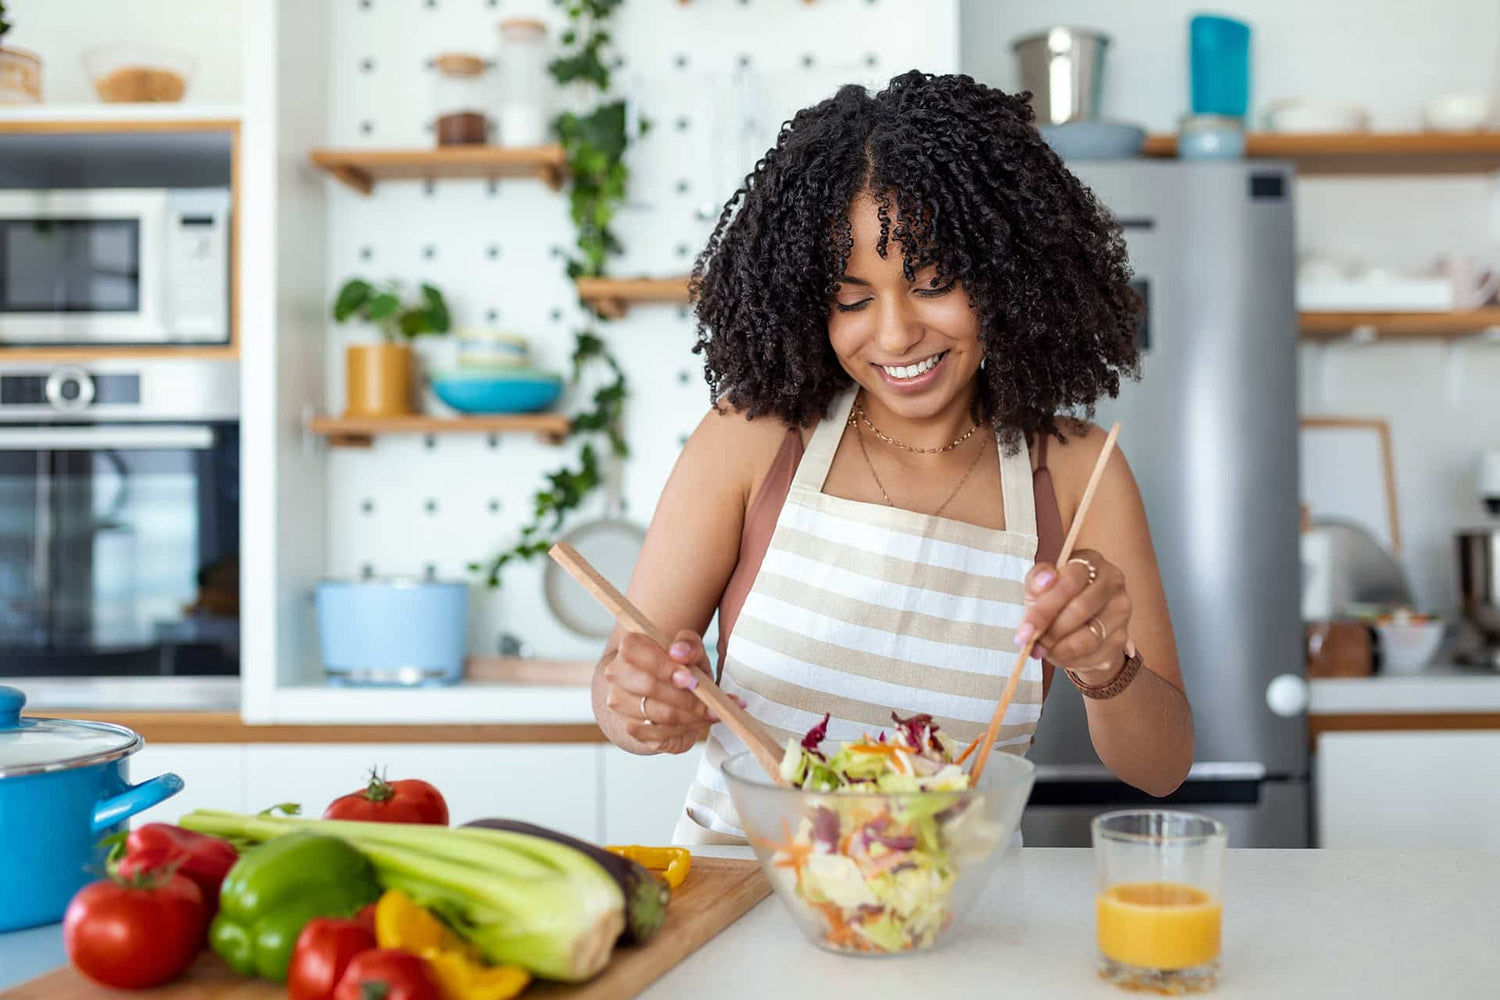 Fit female smiling while mixing salad in kitchen